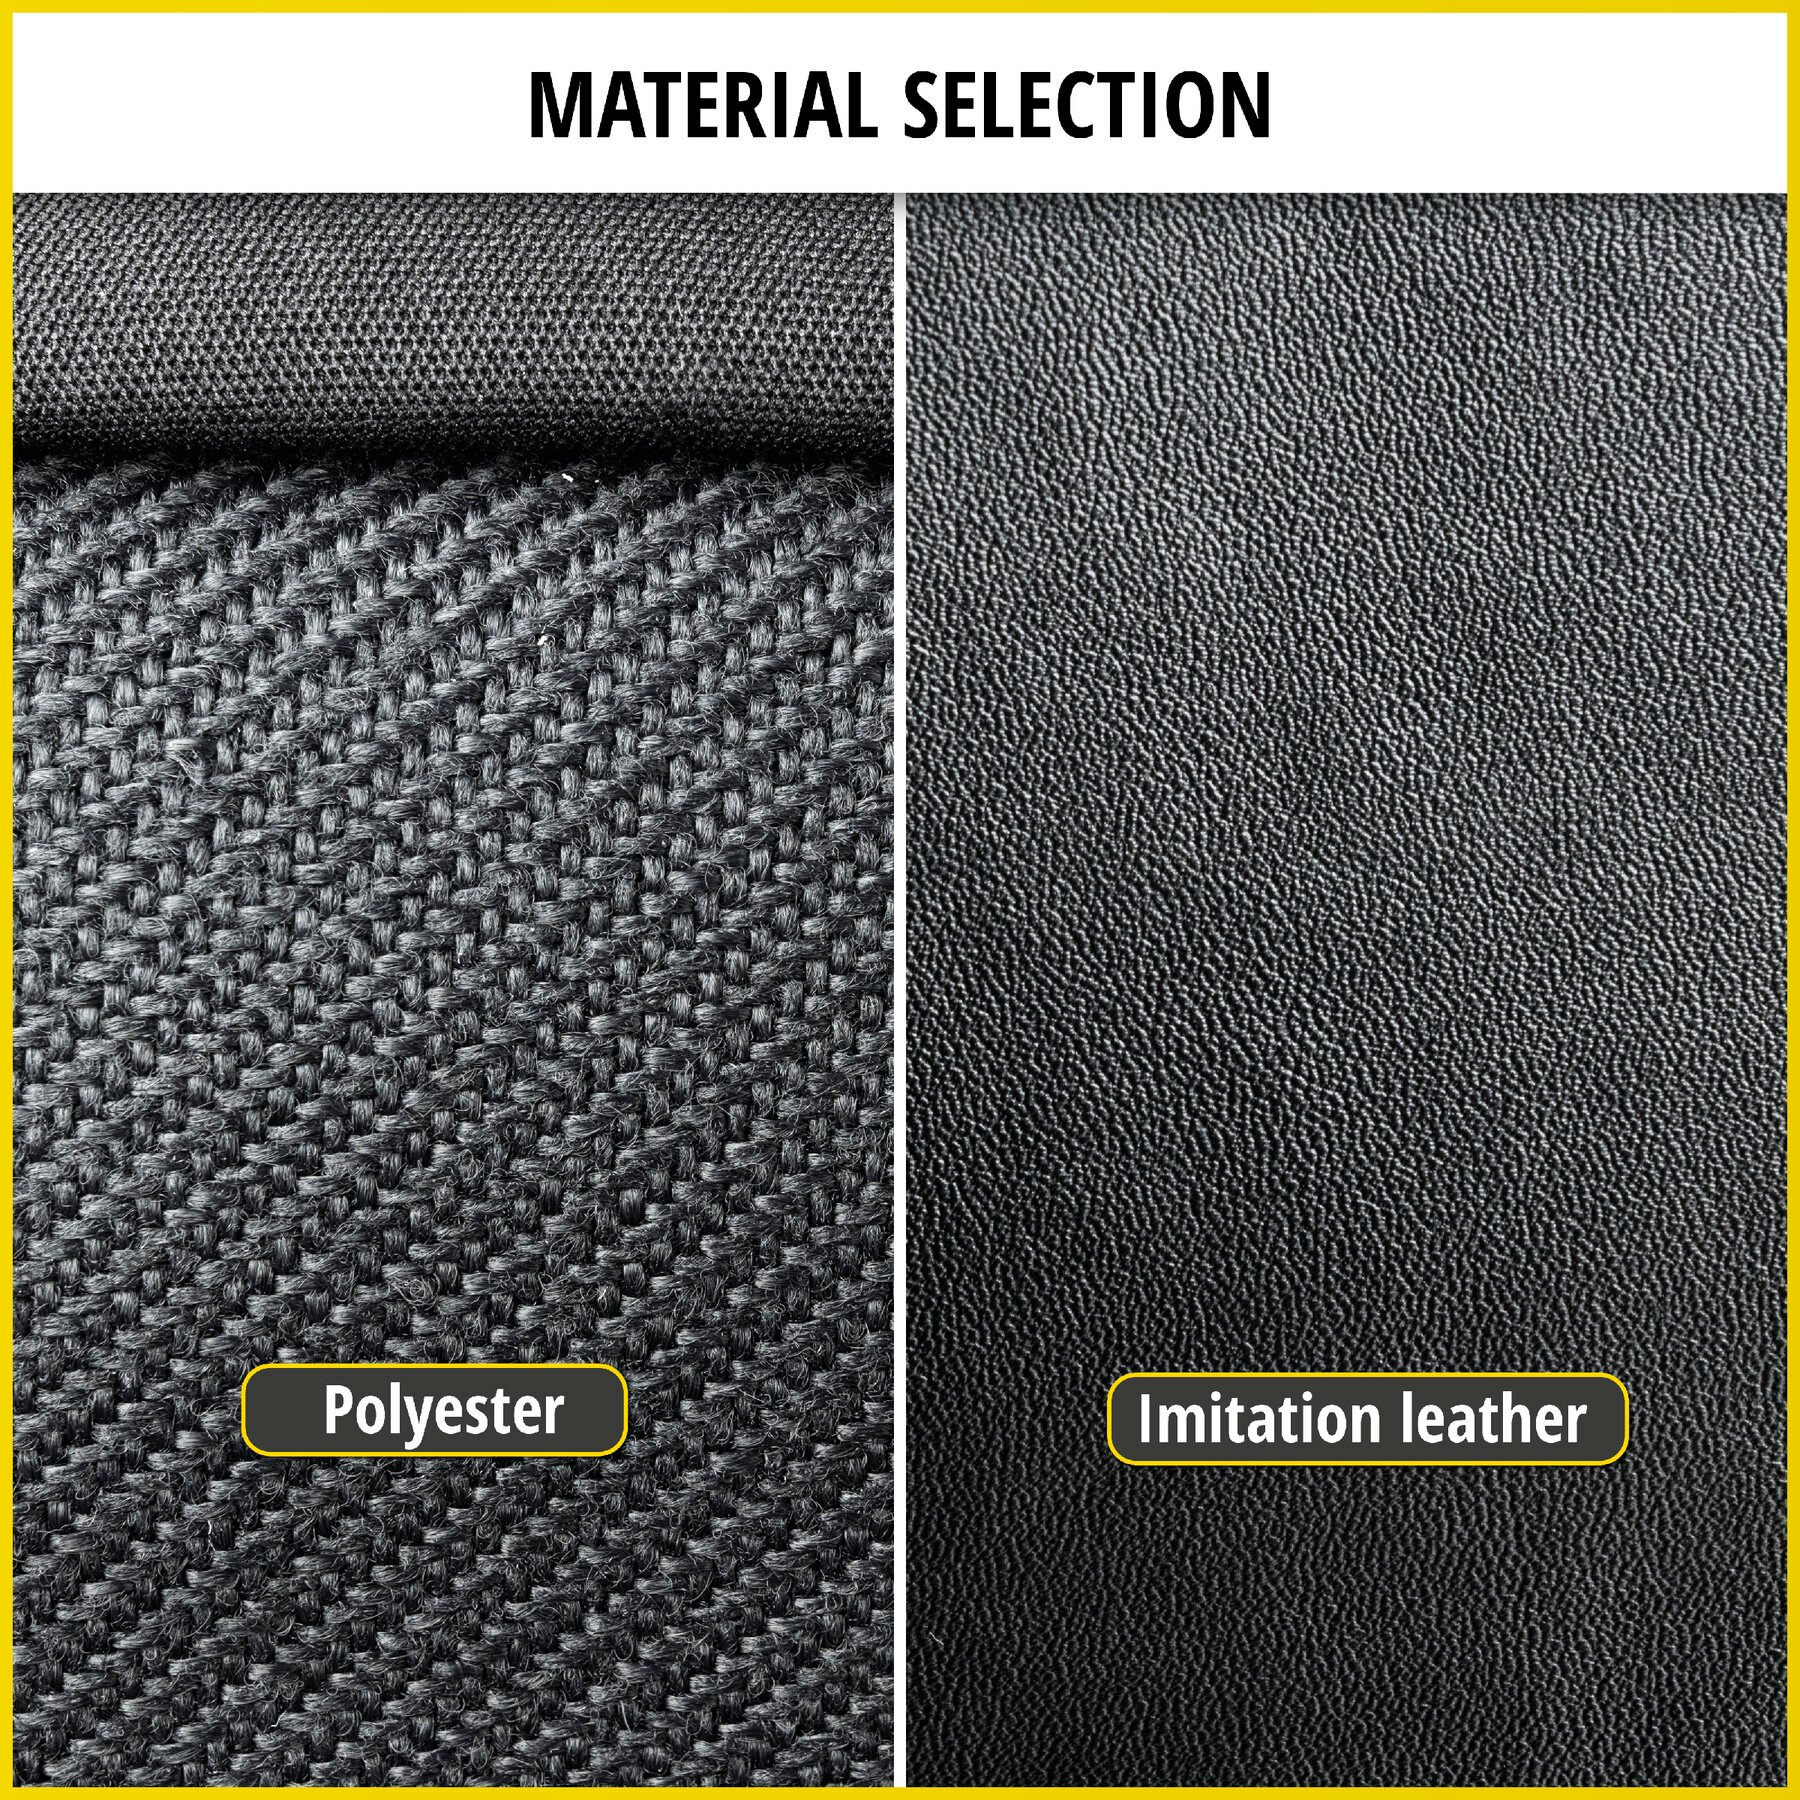 Seat cover made of imitation leather for Mercedes-Benz V-Class 447, single seat cover driver armrest inside